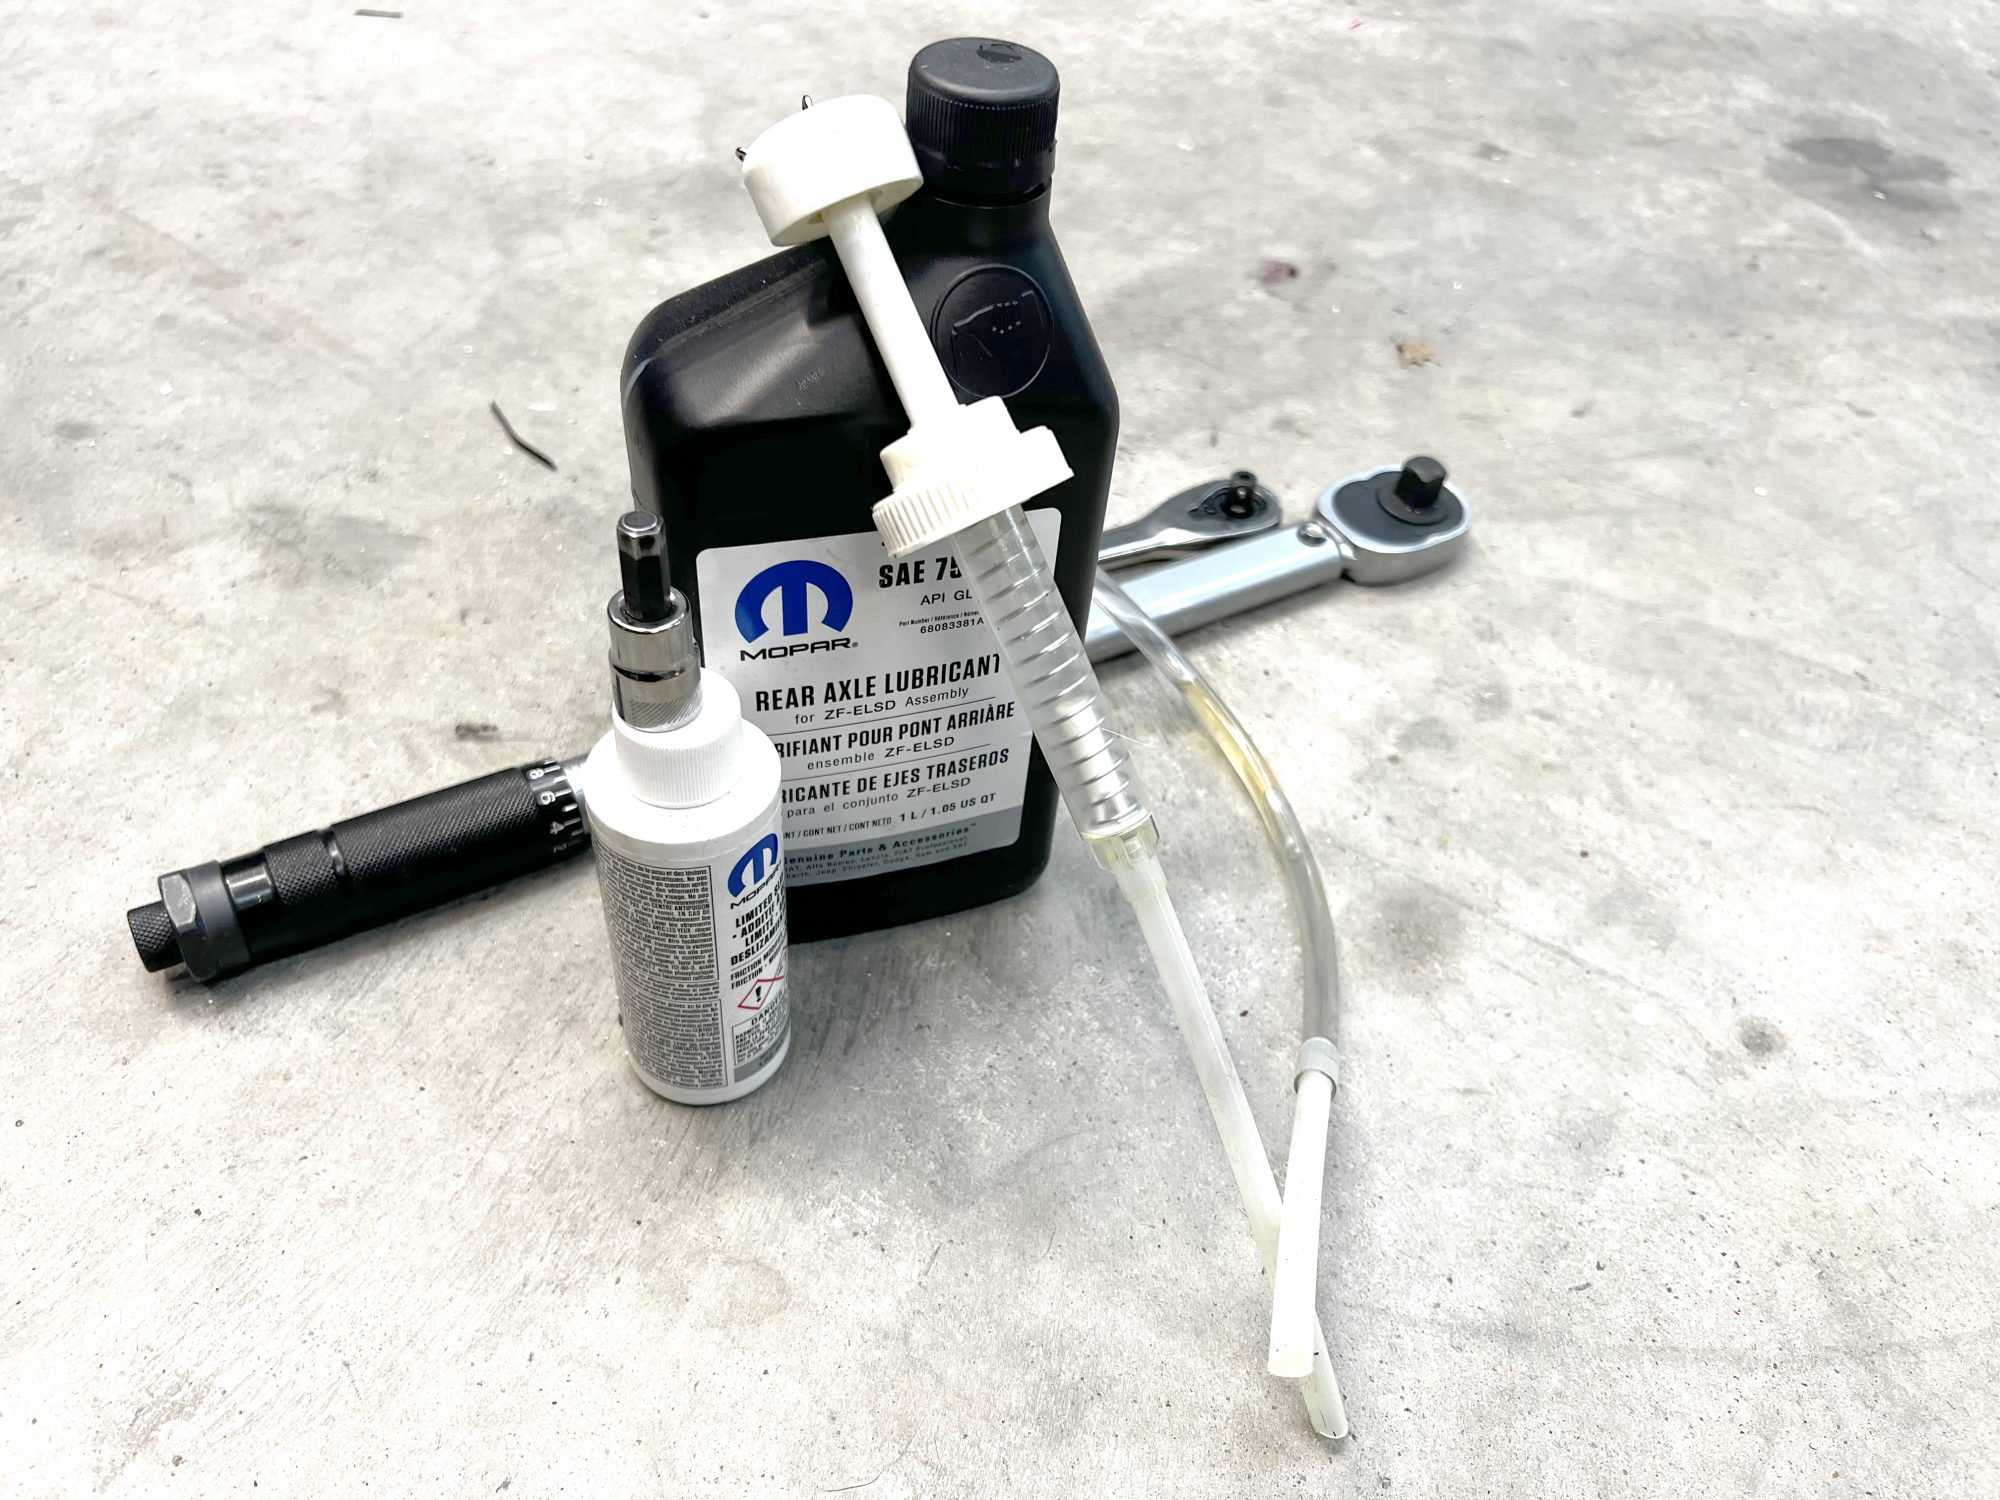 Tools for fluid change